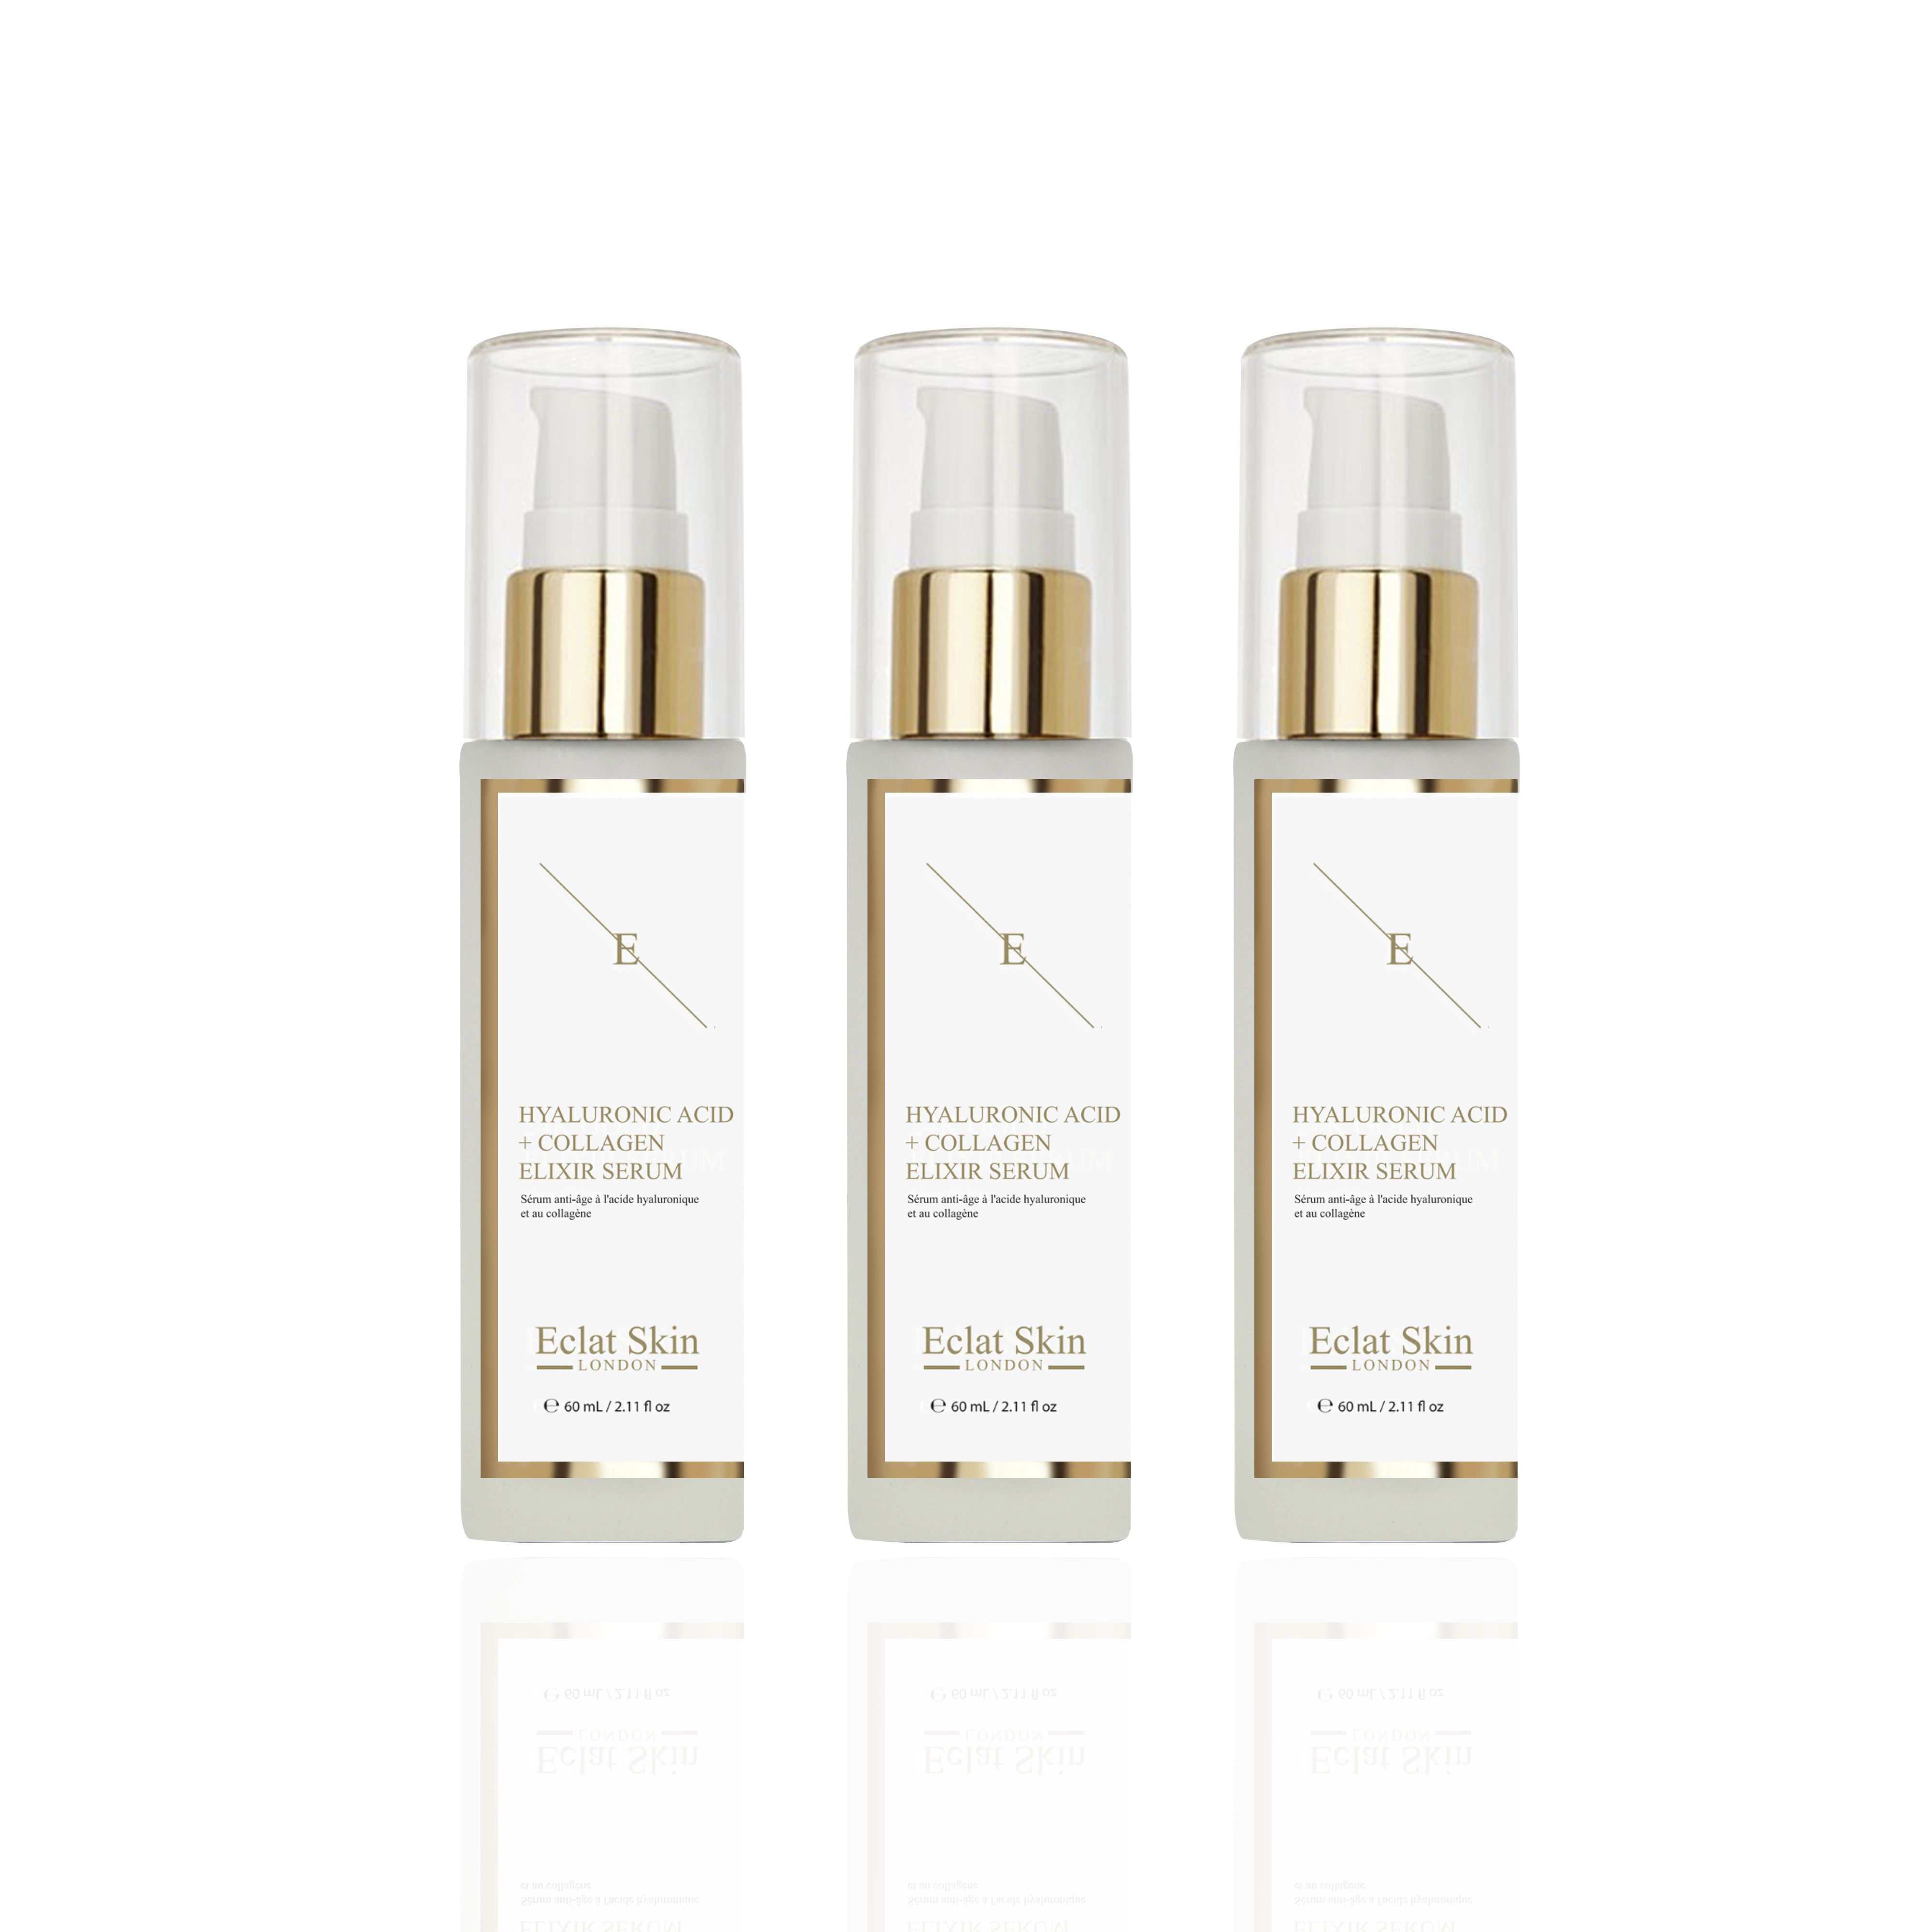 This anti-ageing serum contains pioneering formula of hydration boosting Hyaluronic acid and Hydrolysed Collagen. The serum aims to smoothen the look of dehydration lines for youthful plump and nourished looking complexion.